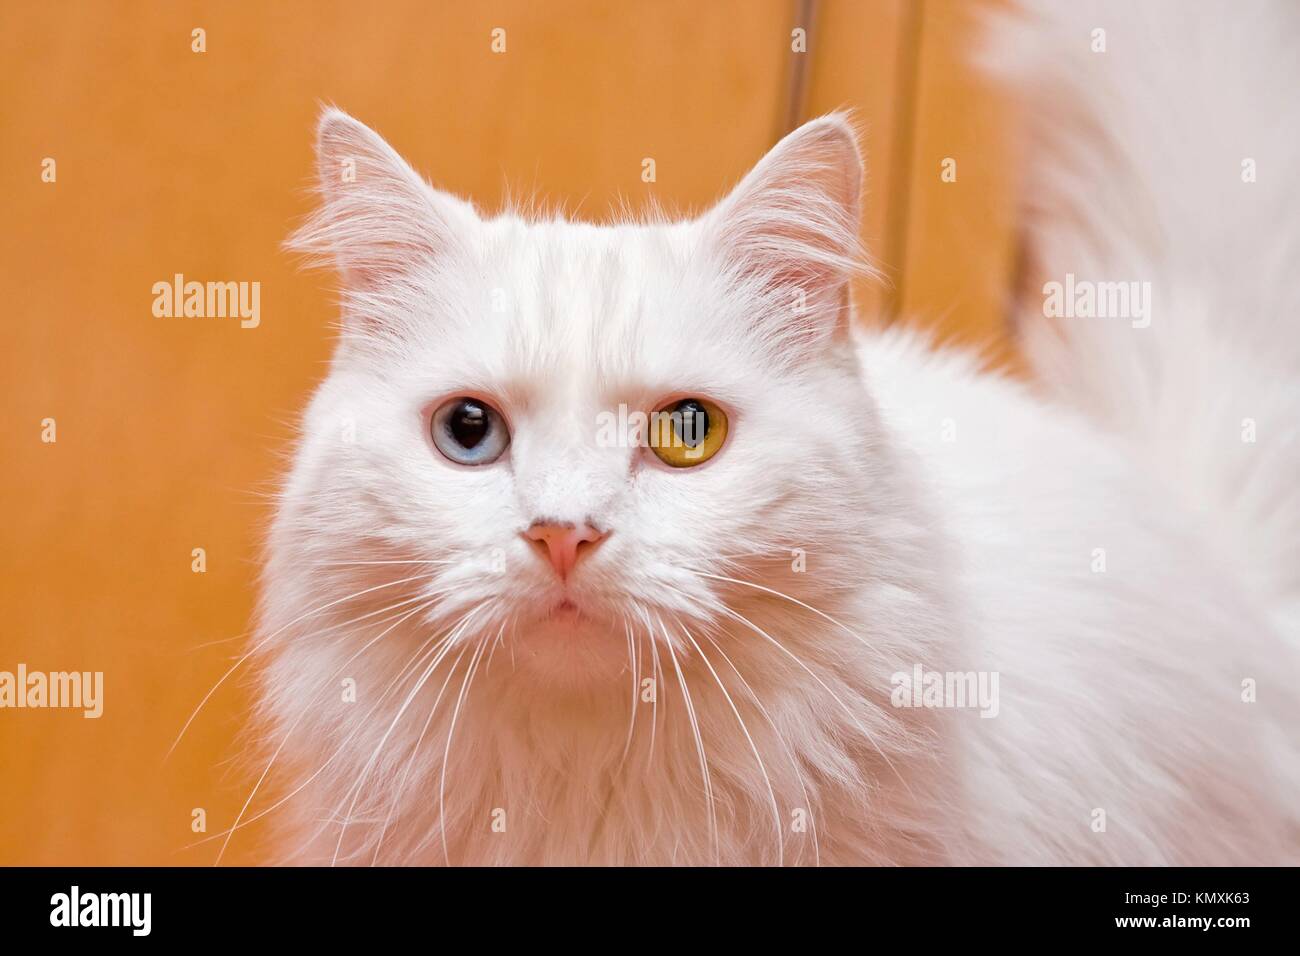 A portrait of a bi-colored eye blue and yellow medium long haired white cat, like a Persian or RaggaMuffin breed Stock Photo